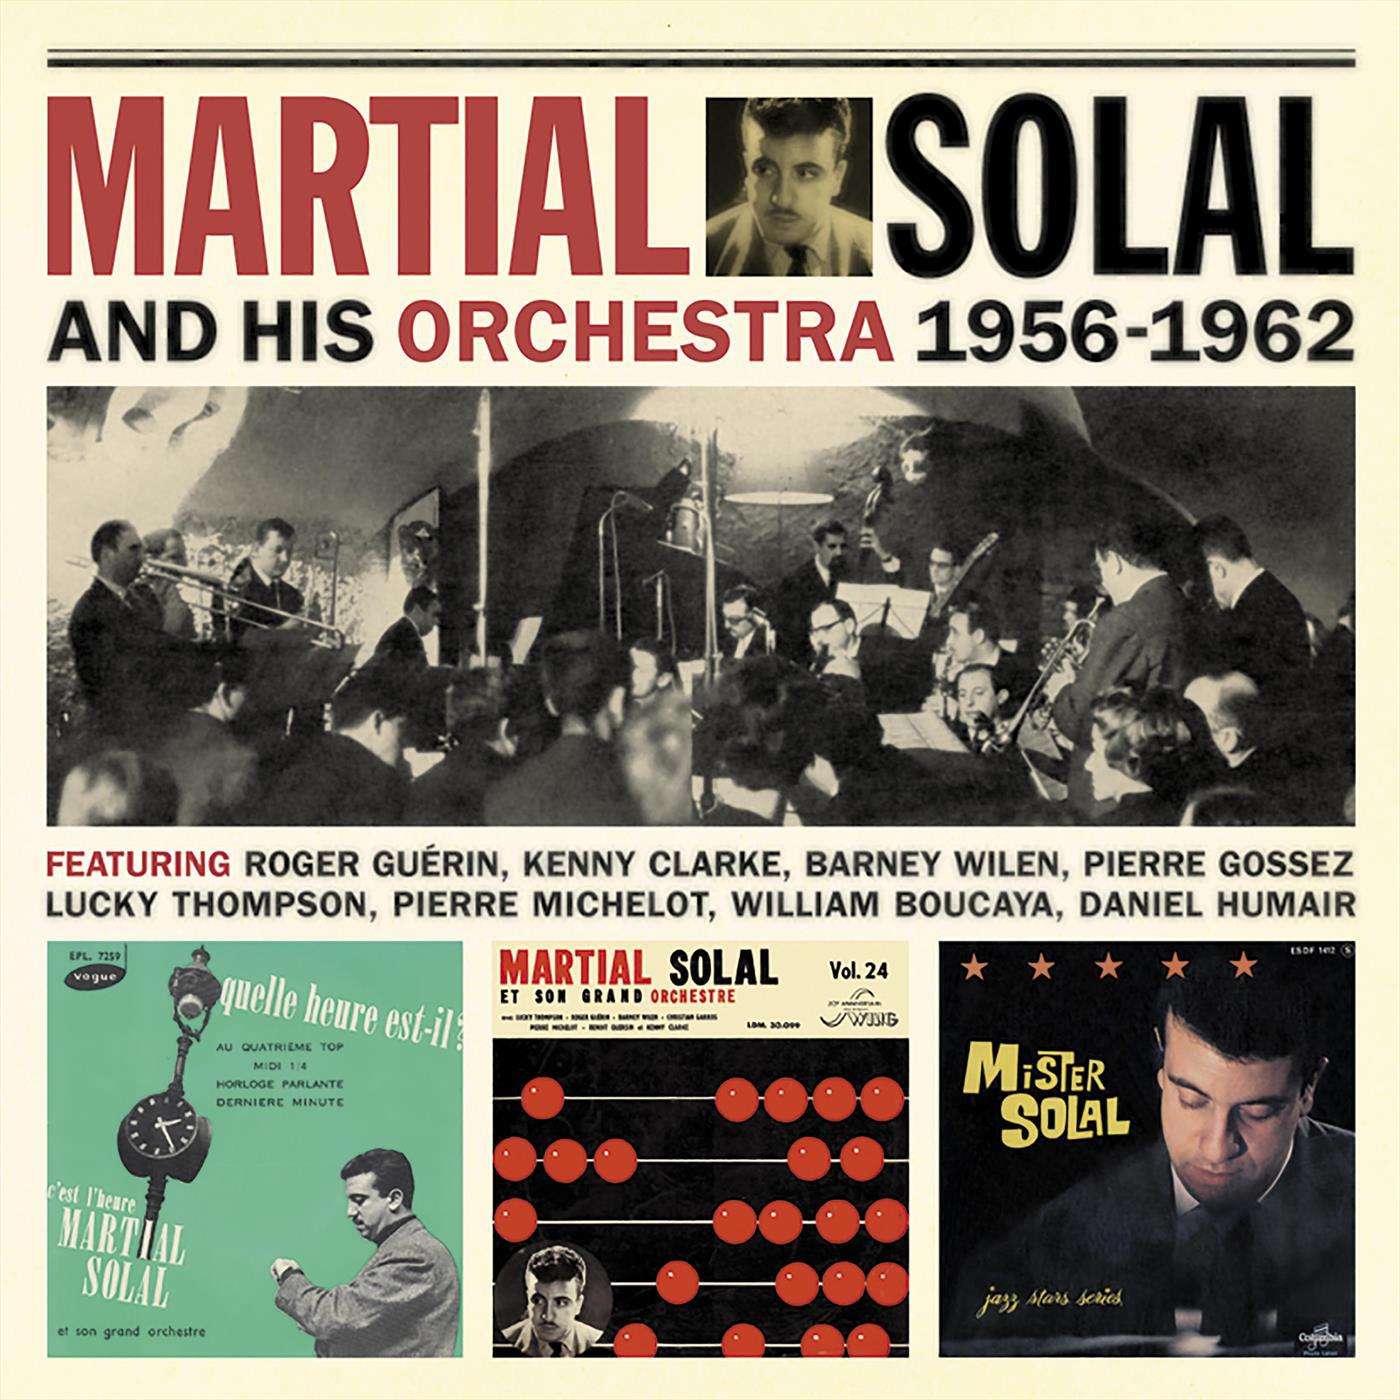 Martial Solal and His Orchestra 1956-1962